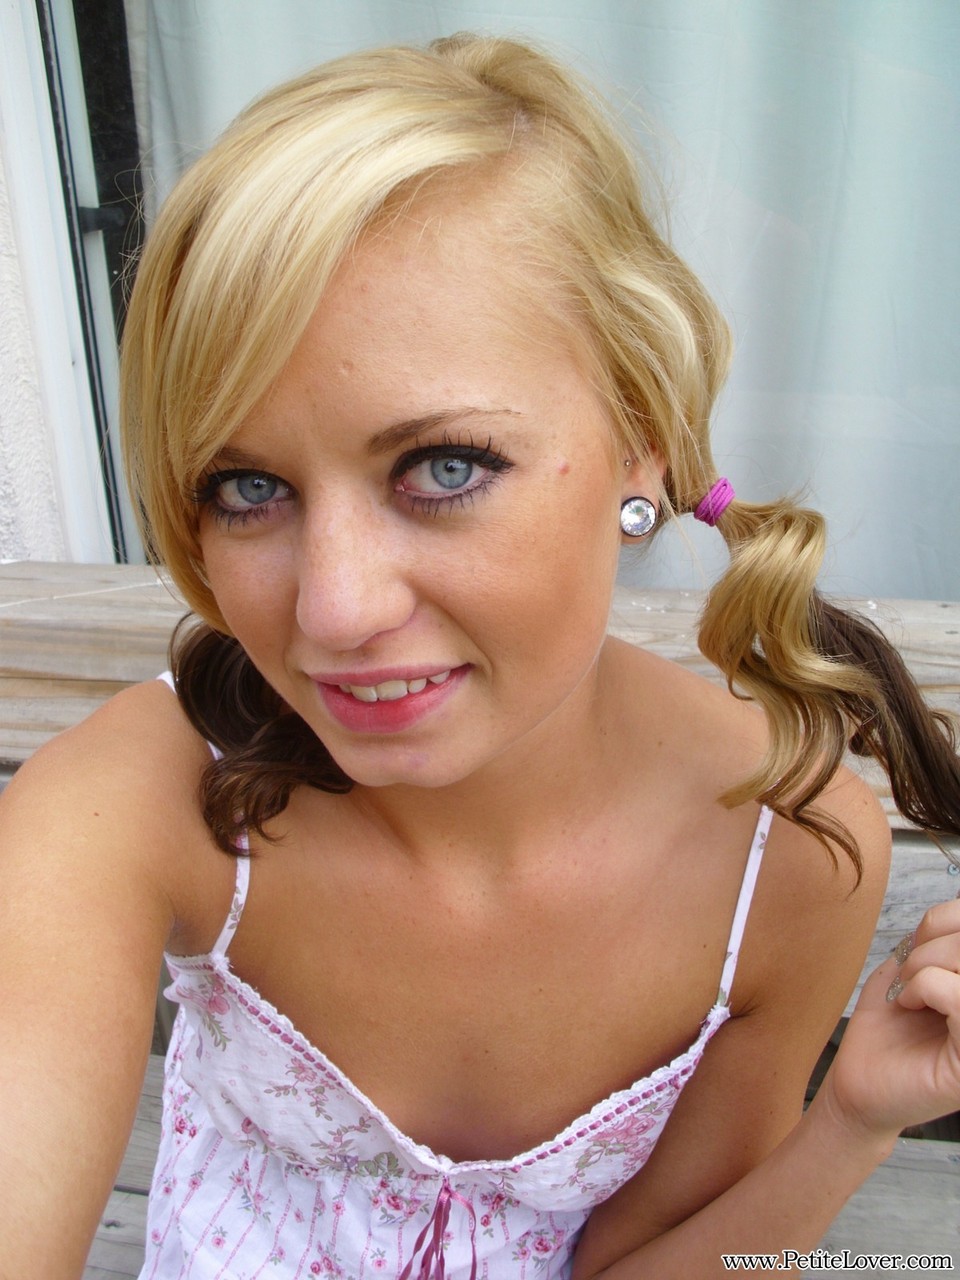 Cute blonde Tiff in pigtails showing off her wee small tits & tiny bald pussy foto porno #428478629 | Petite Lover Pics, Tiff, Amateur, porno móvil